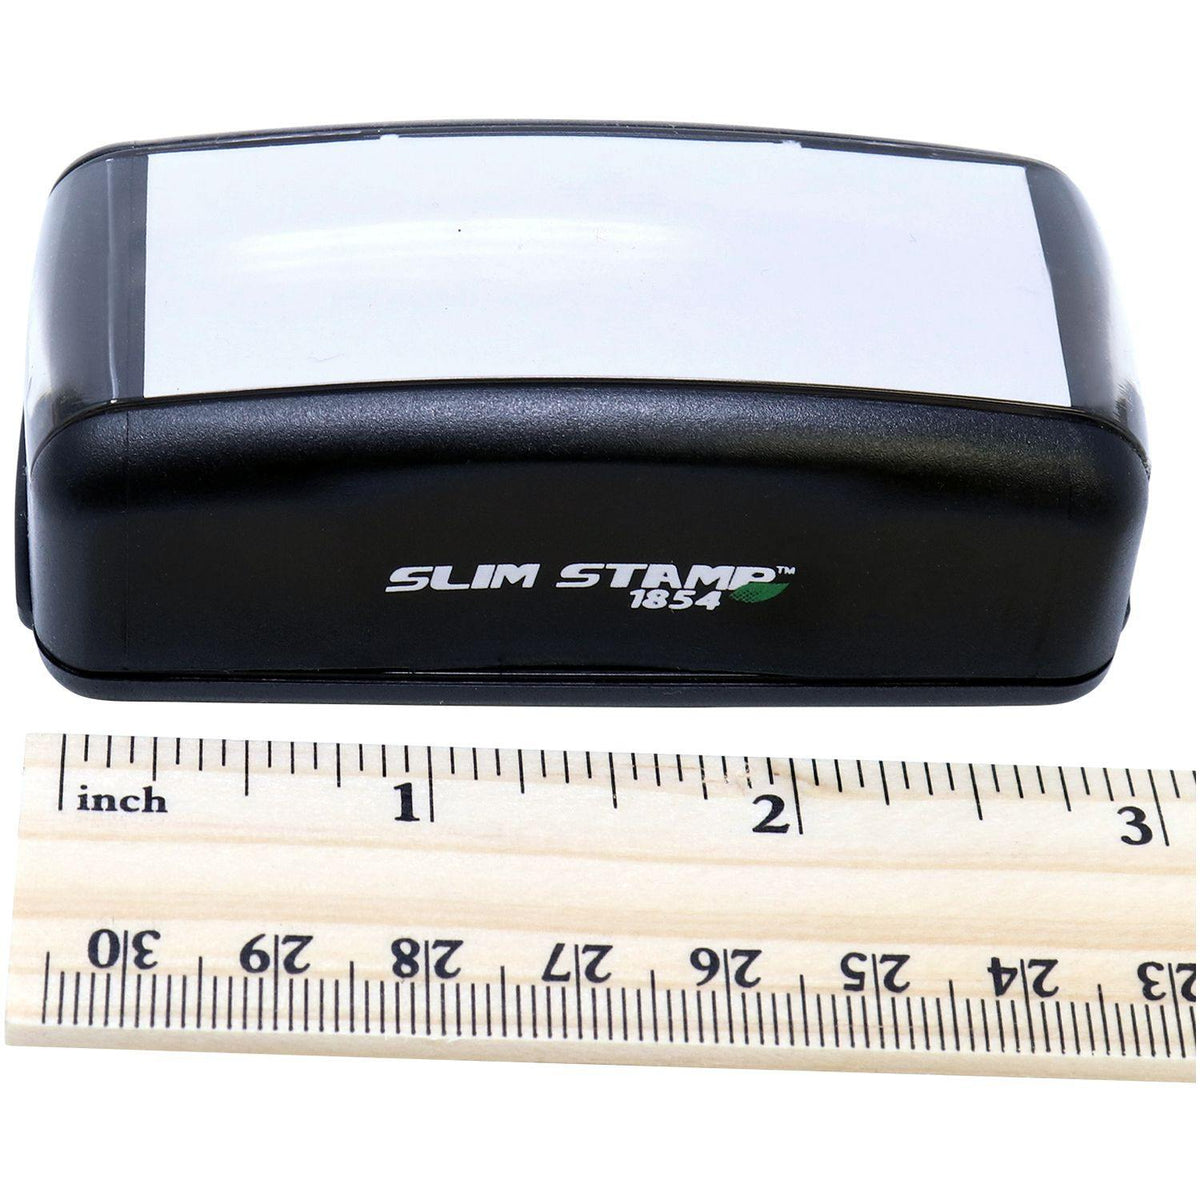 Measurement Large Pre Inked Personal Stamp with Ruler